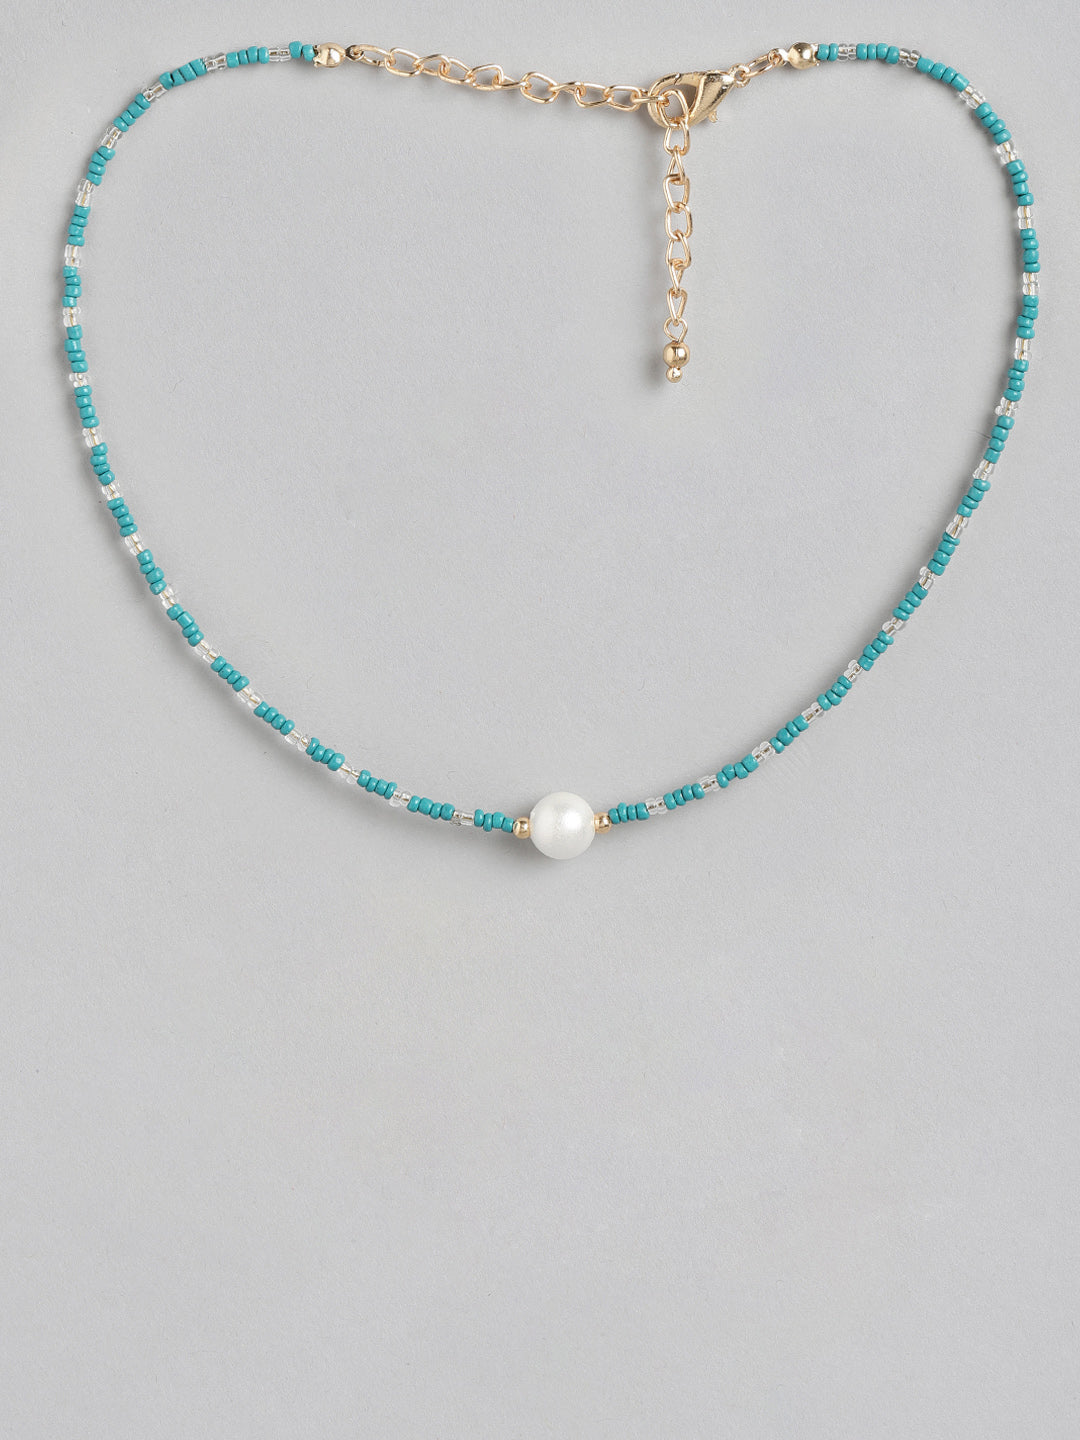 Blueberry blue and white pearl necklace